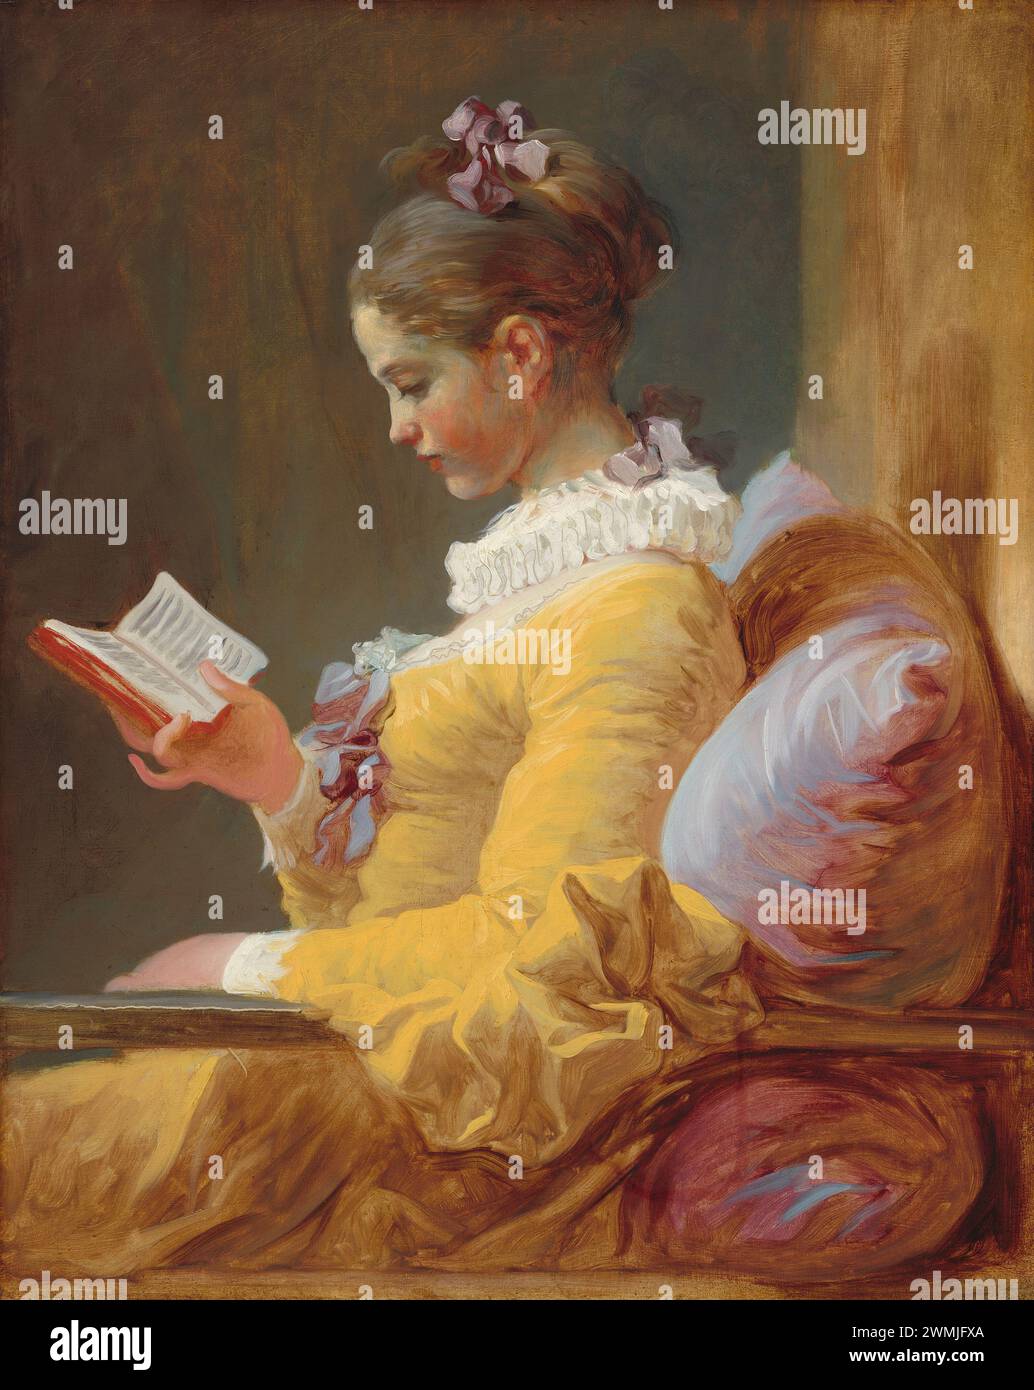 Jean-Honoré Fragonard (French, 1732 - 1806 ), Young Girl Reading, c. 1770, oil on canvas, Stock Photo